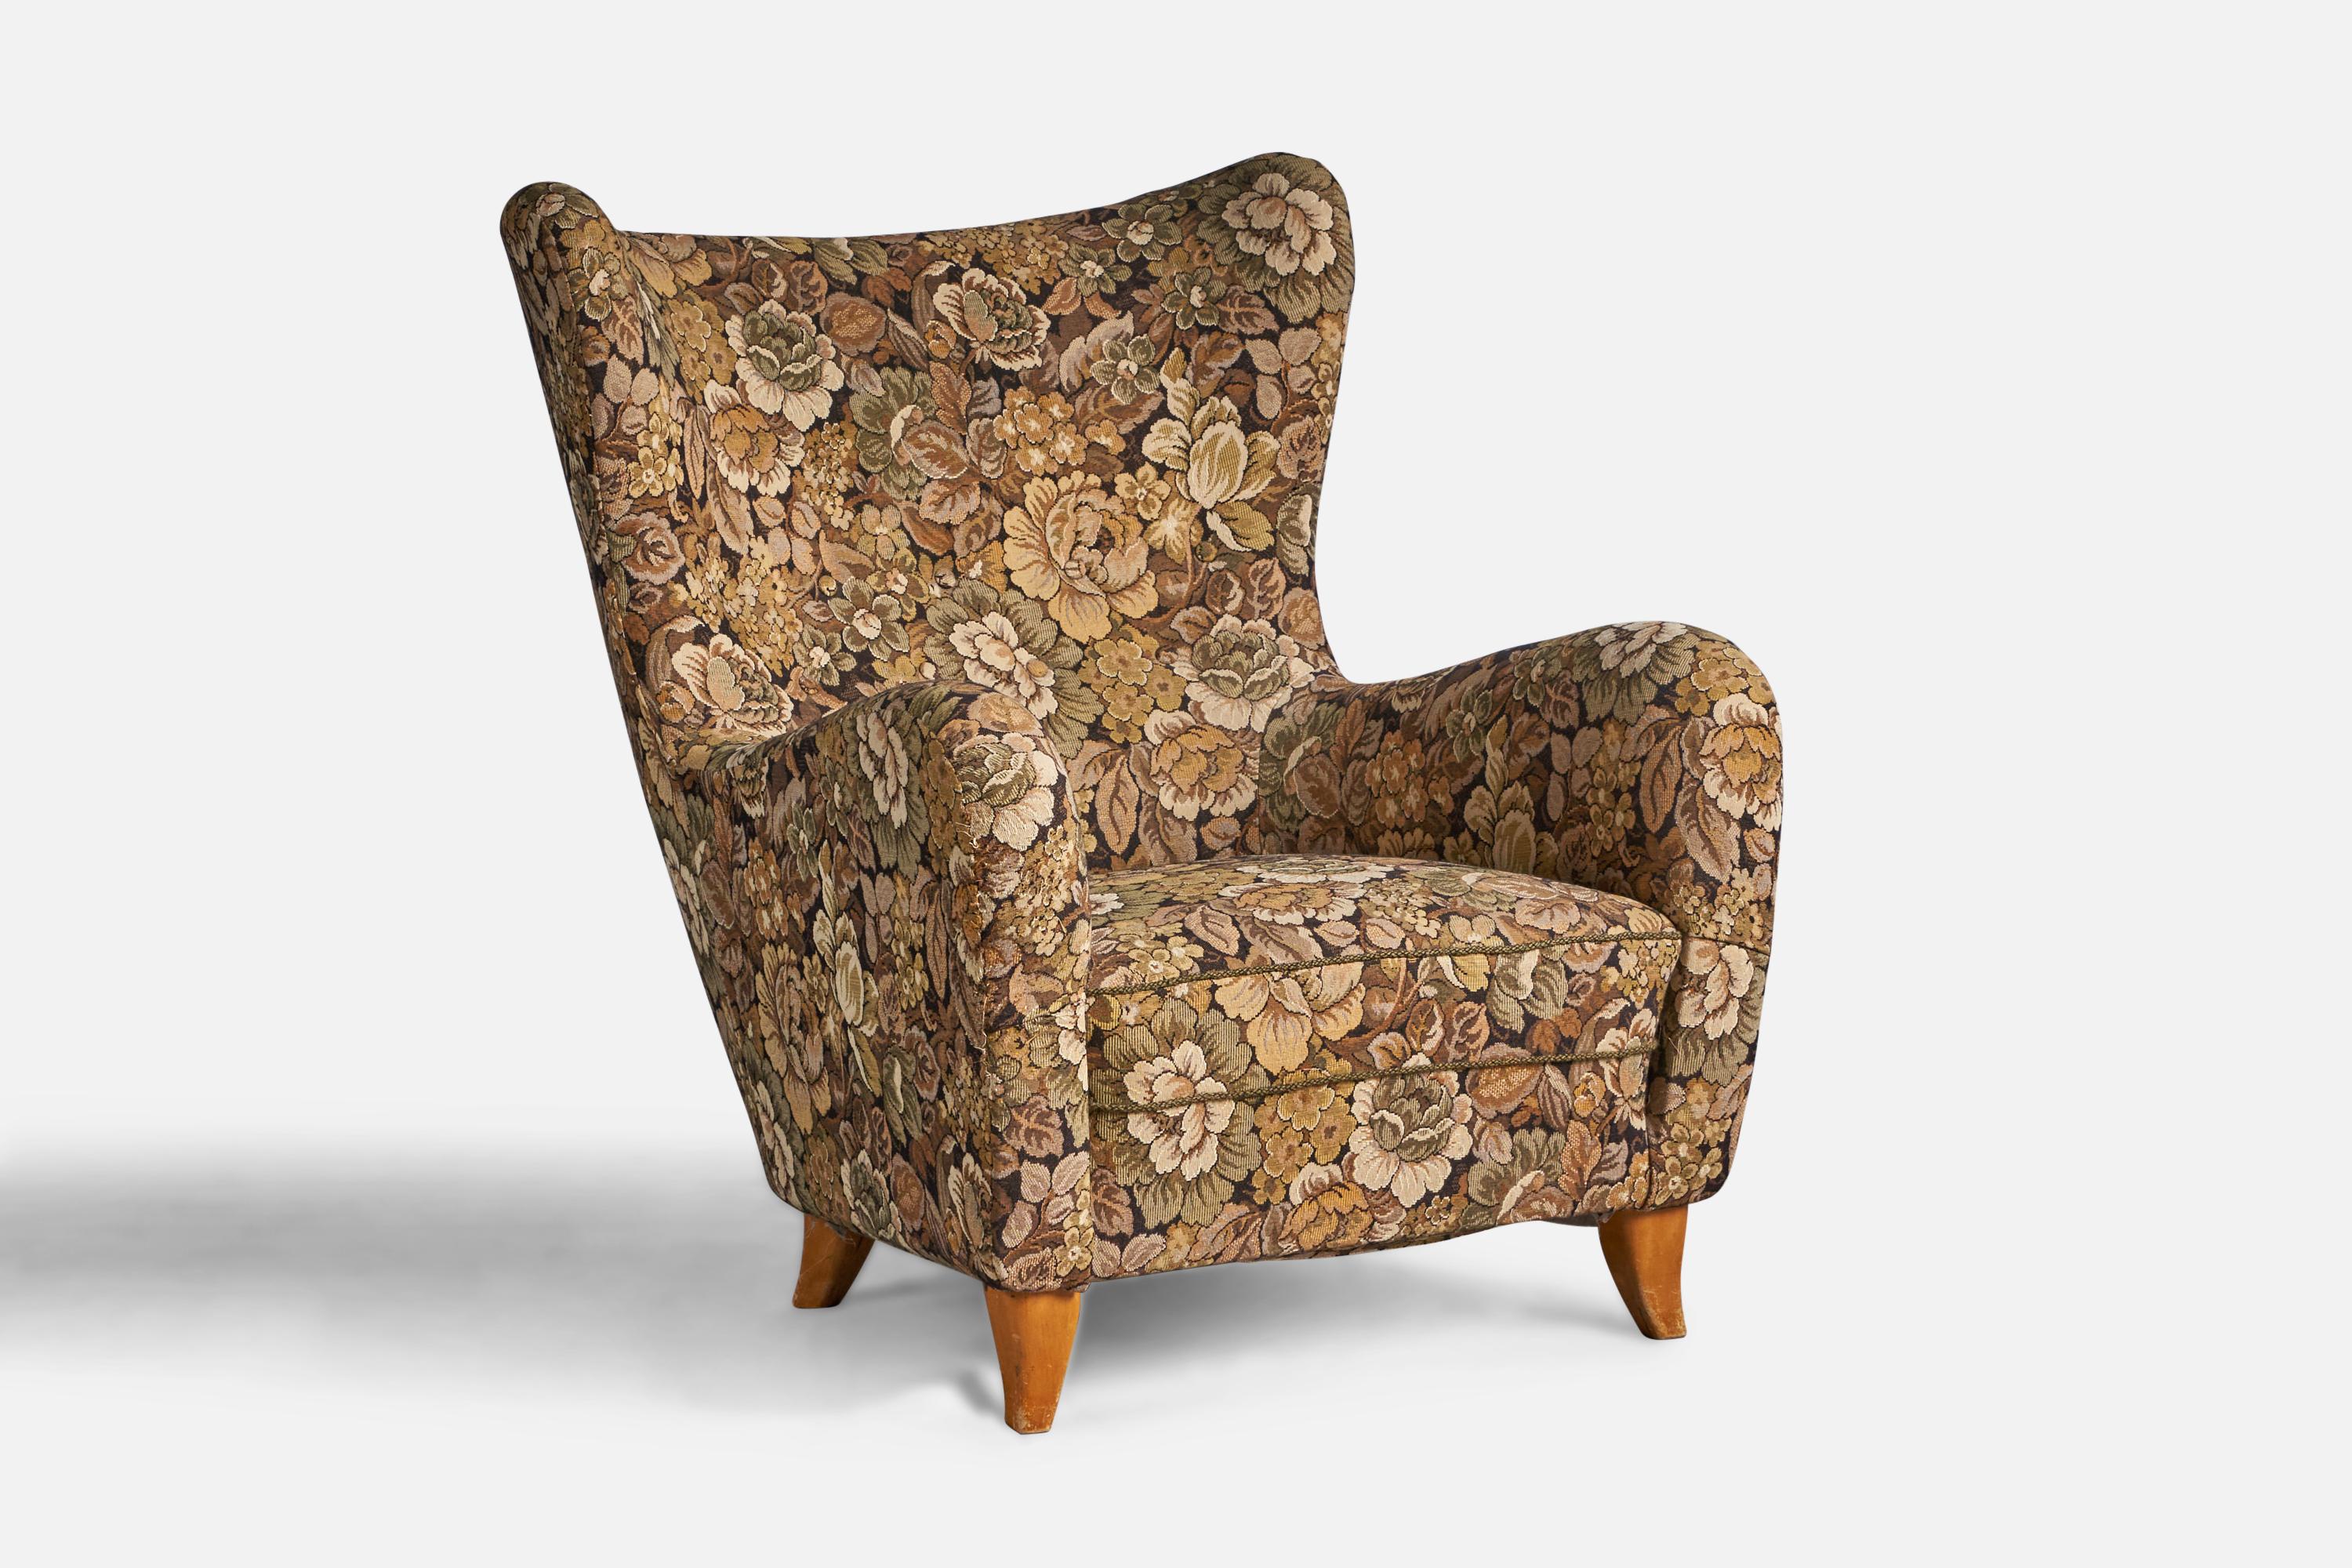 A floral-printed fabric and wood lounge chair, designed by Olle Sjögren and produced by O.H. Sjögren, Sweden, 1940s.

15” seat height